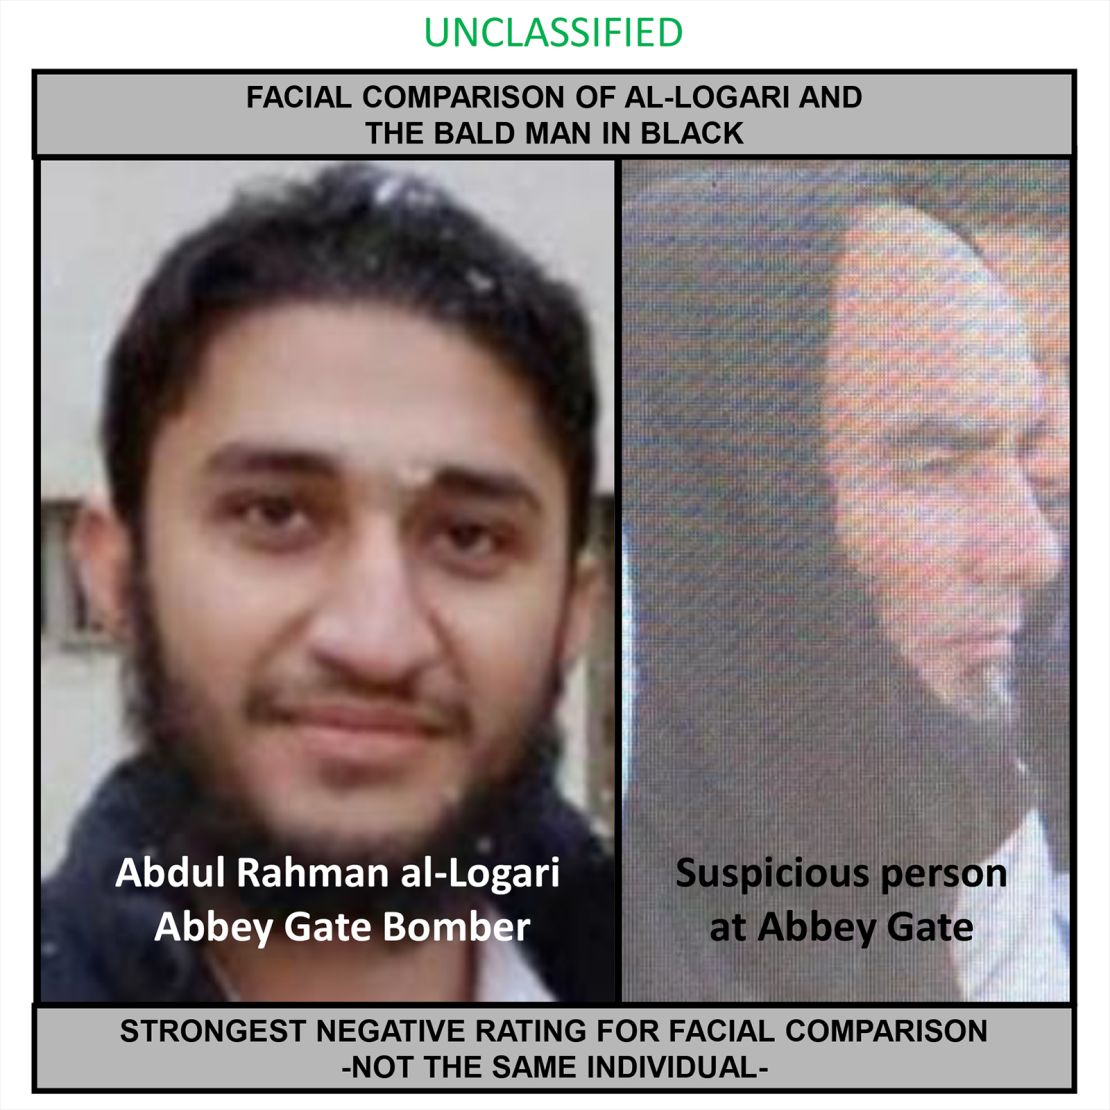 Left: Man confirmed by US intelligence to be Abbey Gate bomber, Abdul Rahman al-Logari. Right: Man believed to be the suicide bomber.